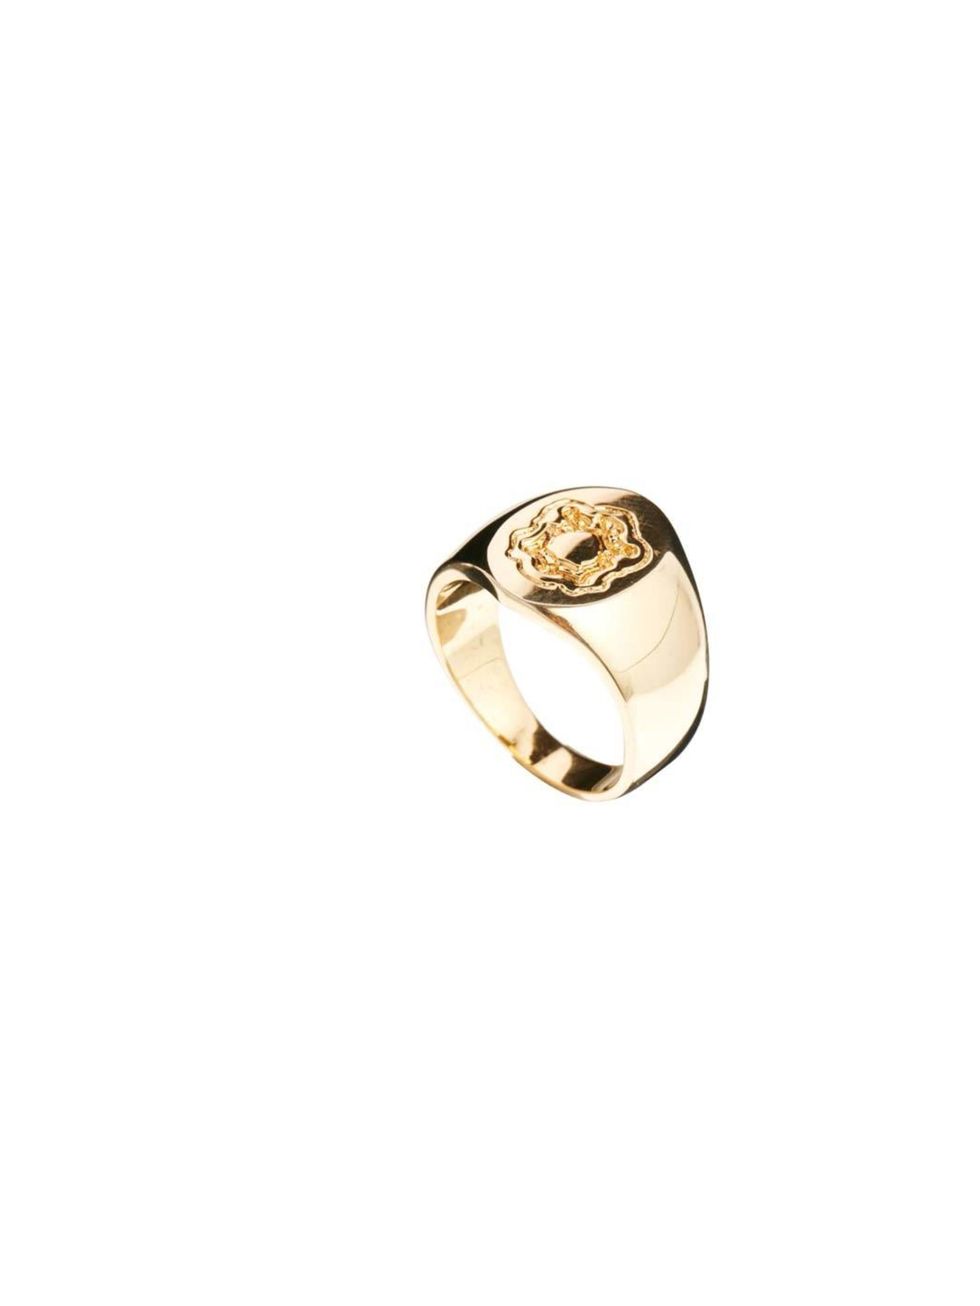 <p>Signet rings are our jewellery obsession du jour - this one also comes in handy when wax-sealing confidential letters. </p><p><a href="http://www.asos.com/ASOS/ASOS-Gold-Plated-Pinky-Ring/Prod/pgeproduct.aspx?iid=3426744&cid=6992&Rf-400=53&Rf900=1500&s